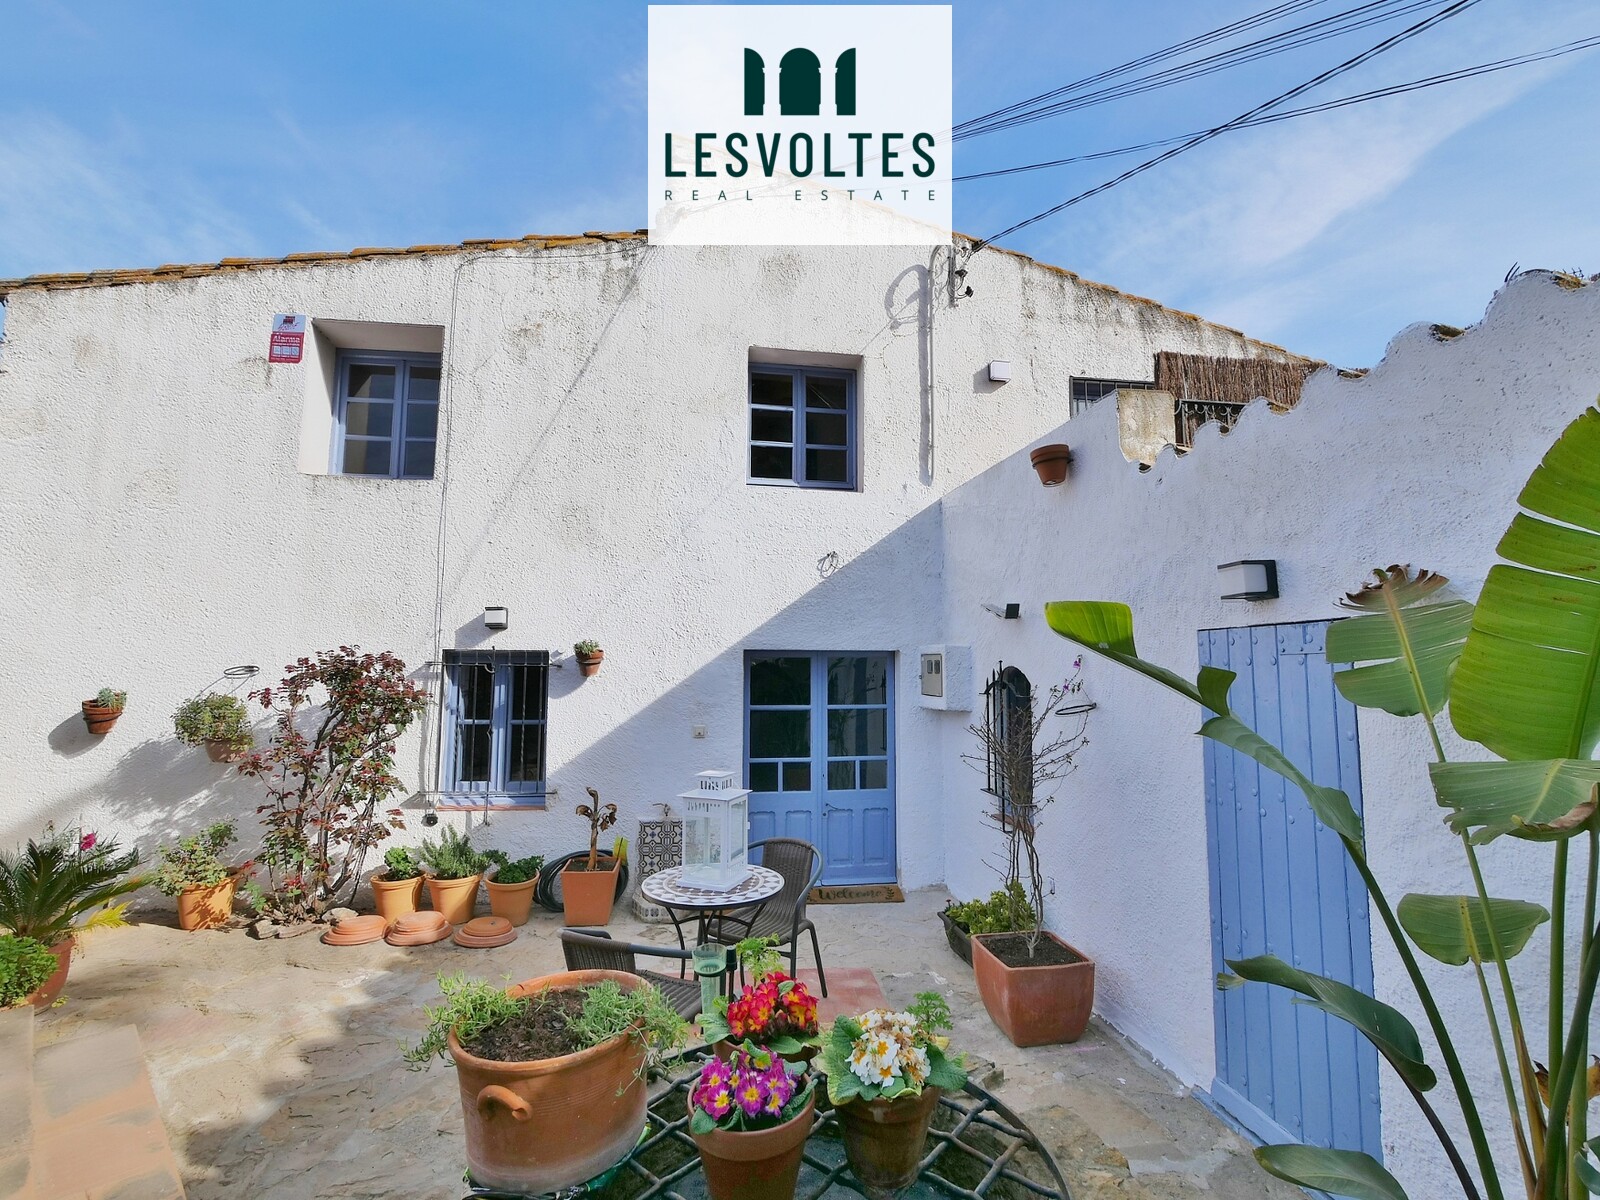 RENOVATED STONE HOUSE OF 158 M2 WITH FRONT YARD AND GARAGE, FOR SALE IN LLOFRIU.